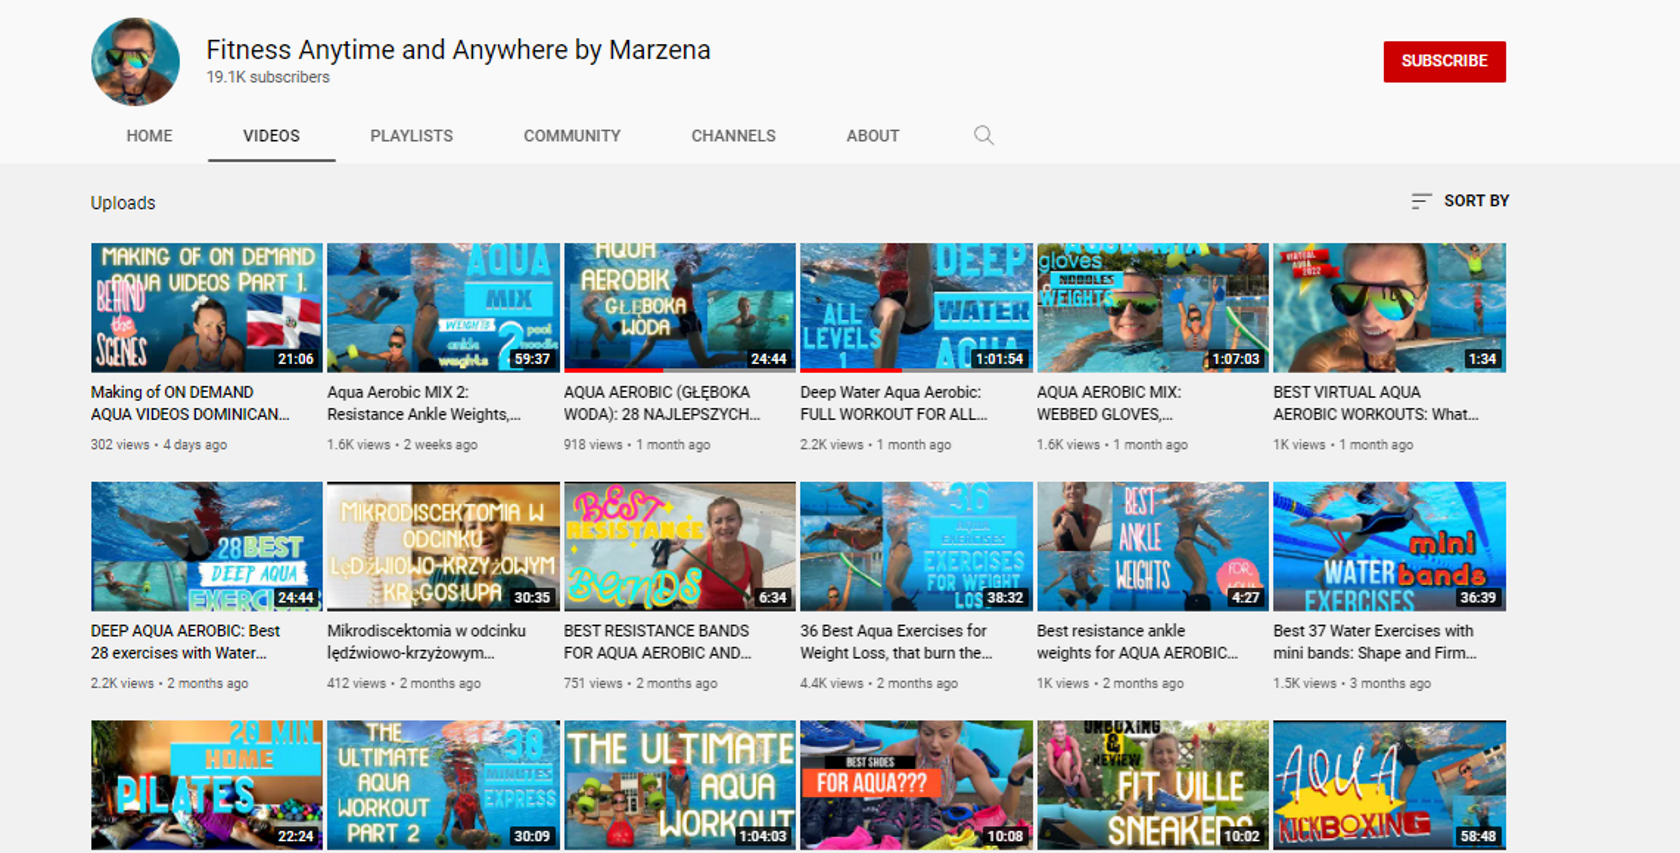 Fitness Anytime Anywhere Marzena Water Aerobics YouTube Channel